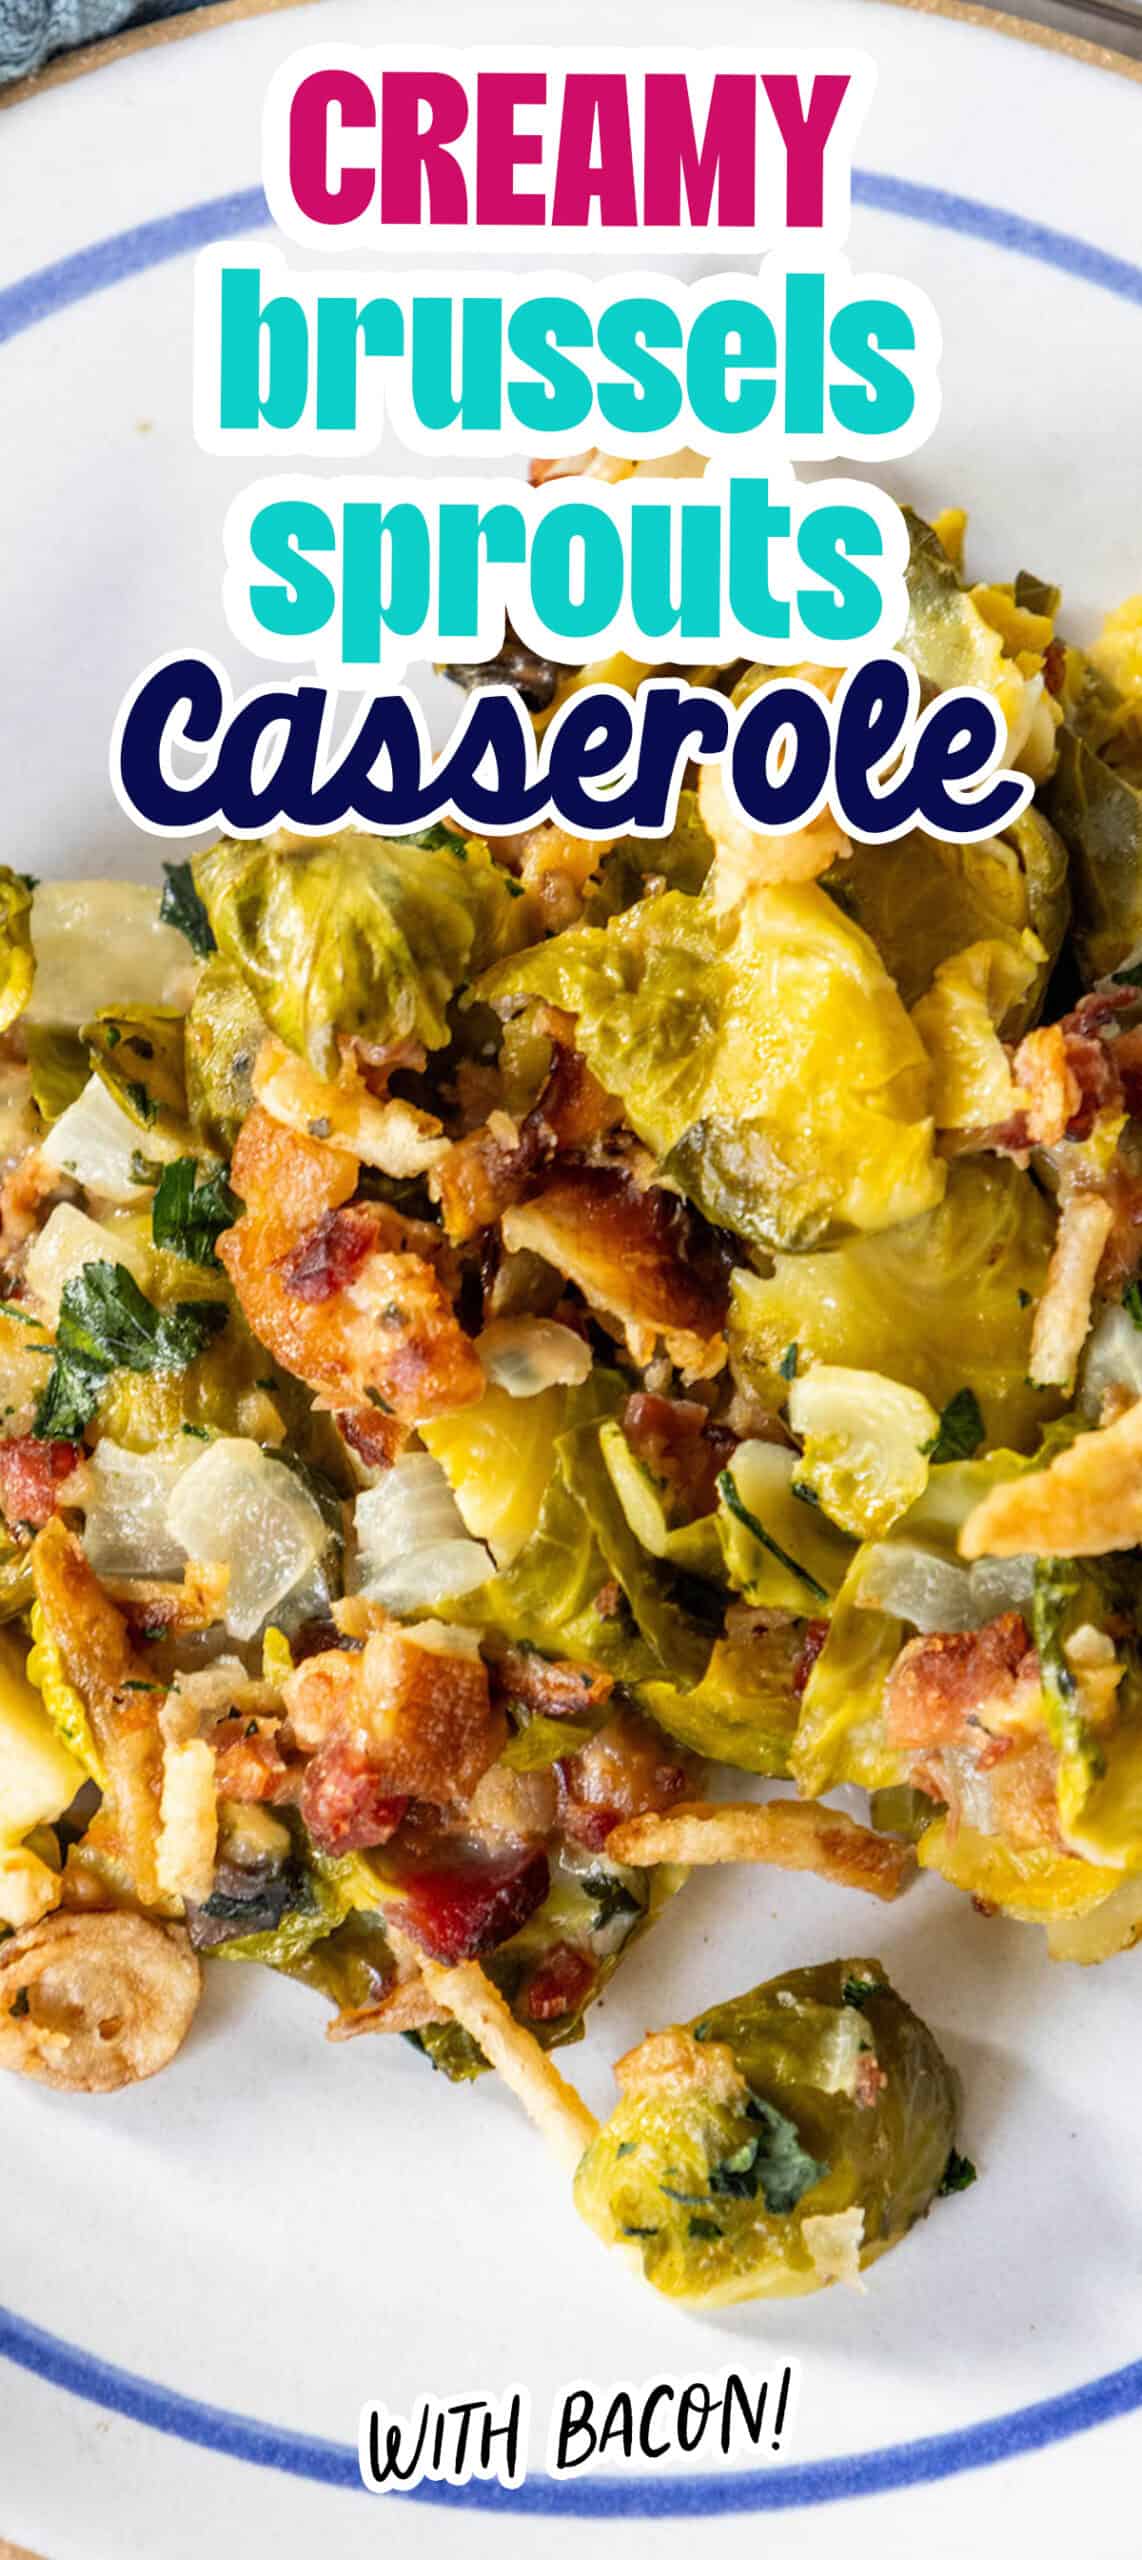 Creamy brussels sprouts casserole with bacon and cream.